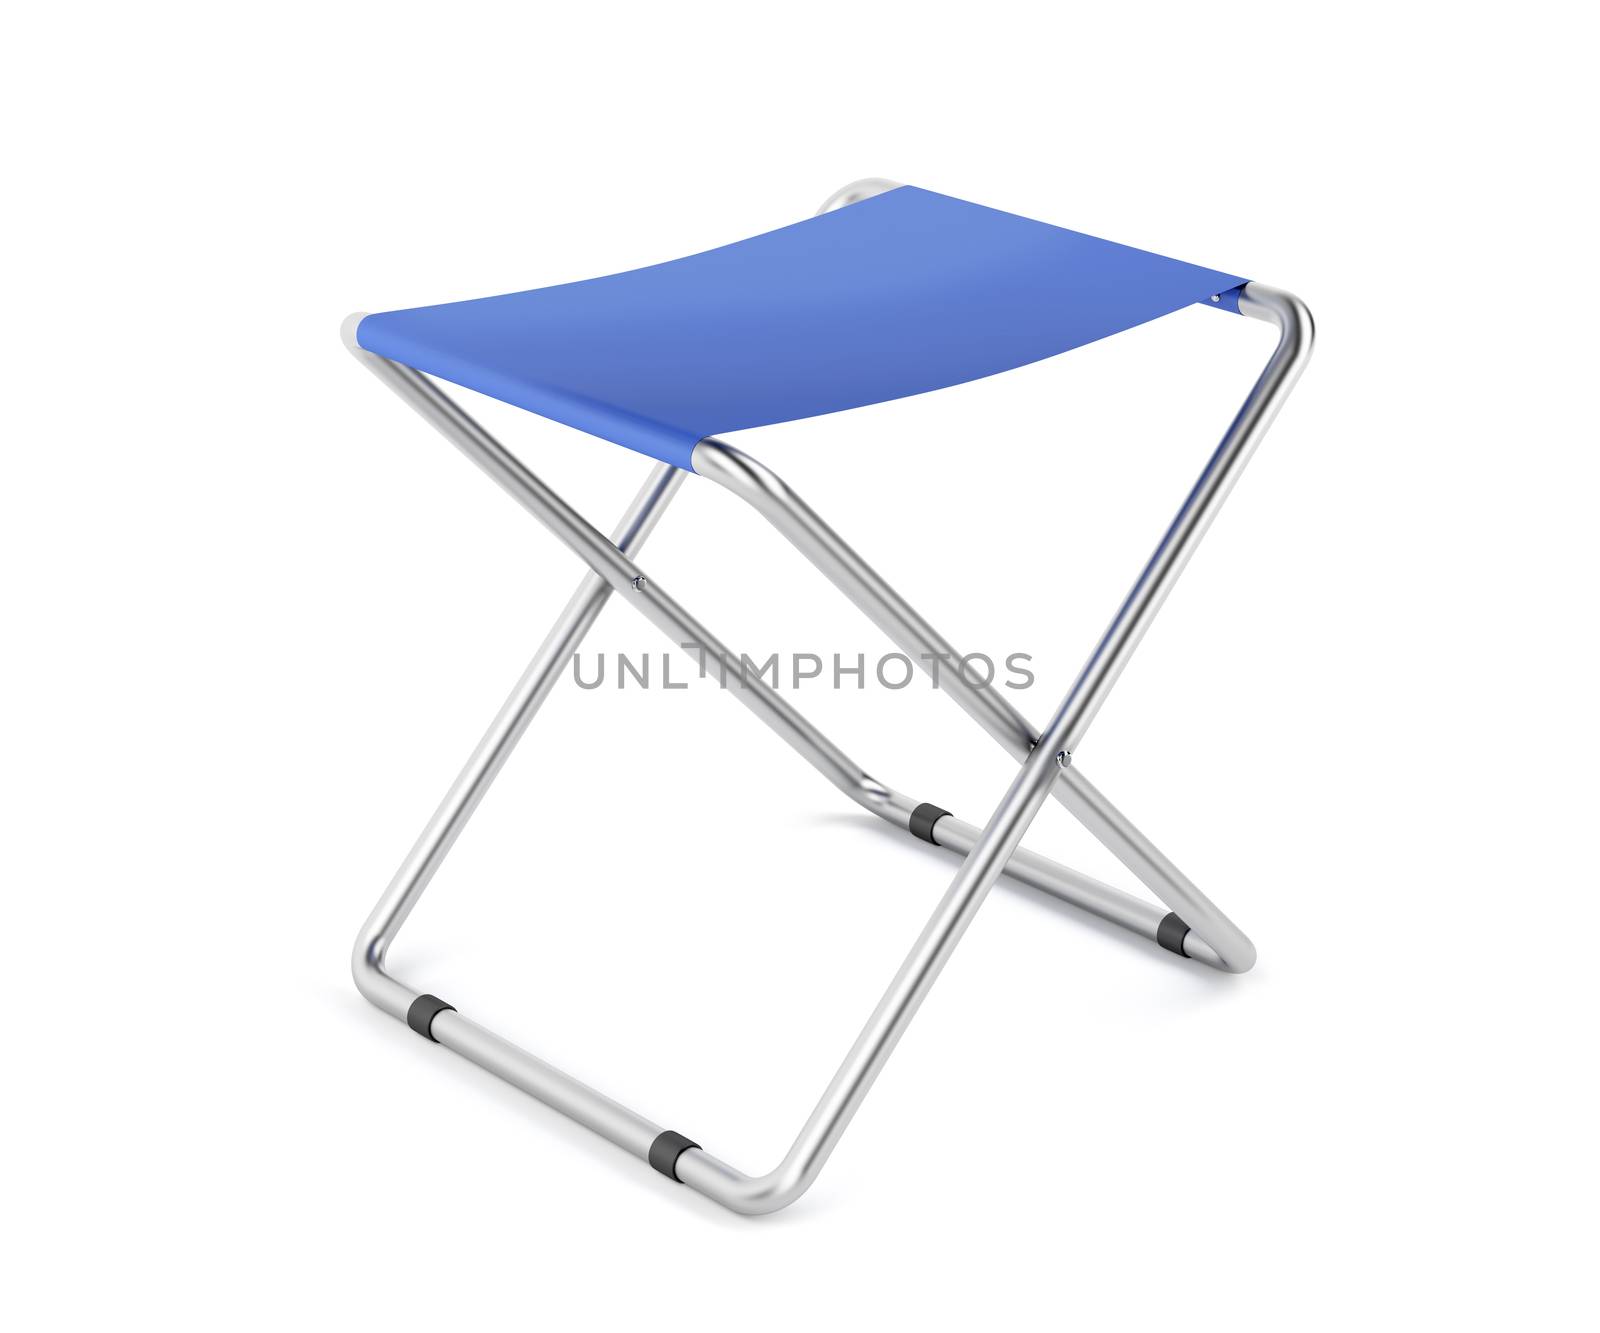 Blue folding stool by magraphics